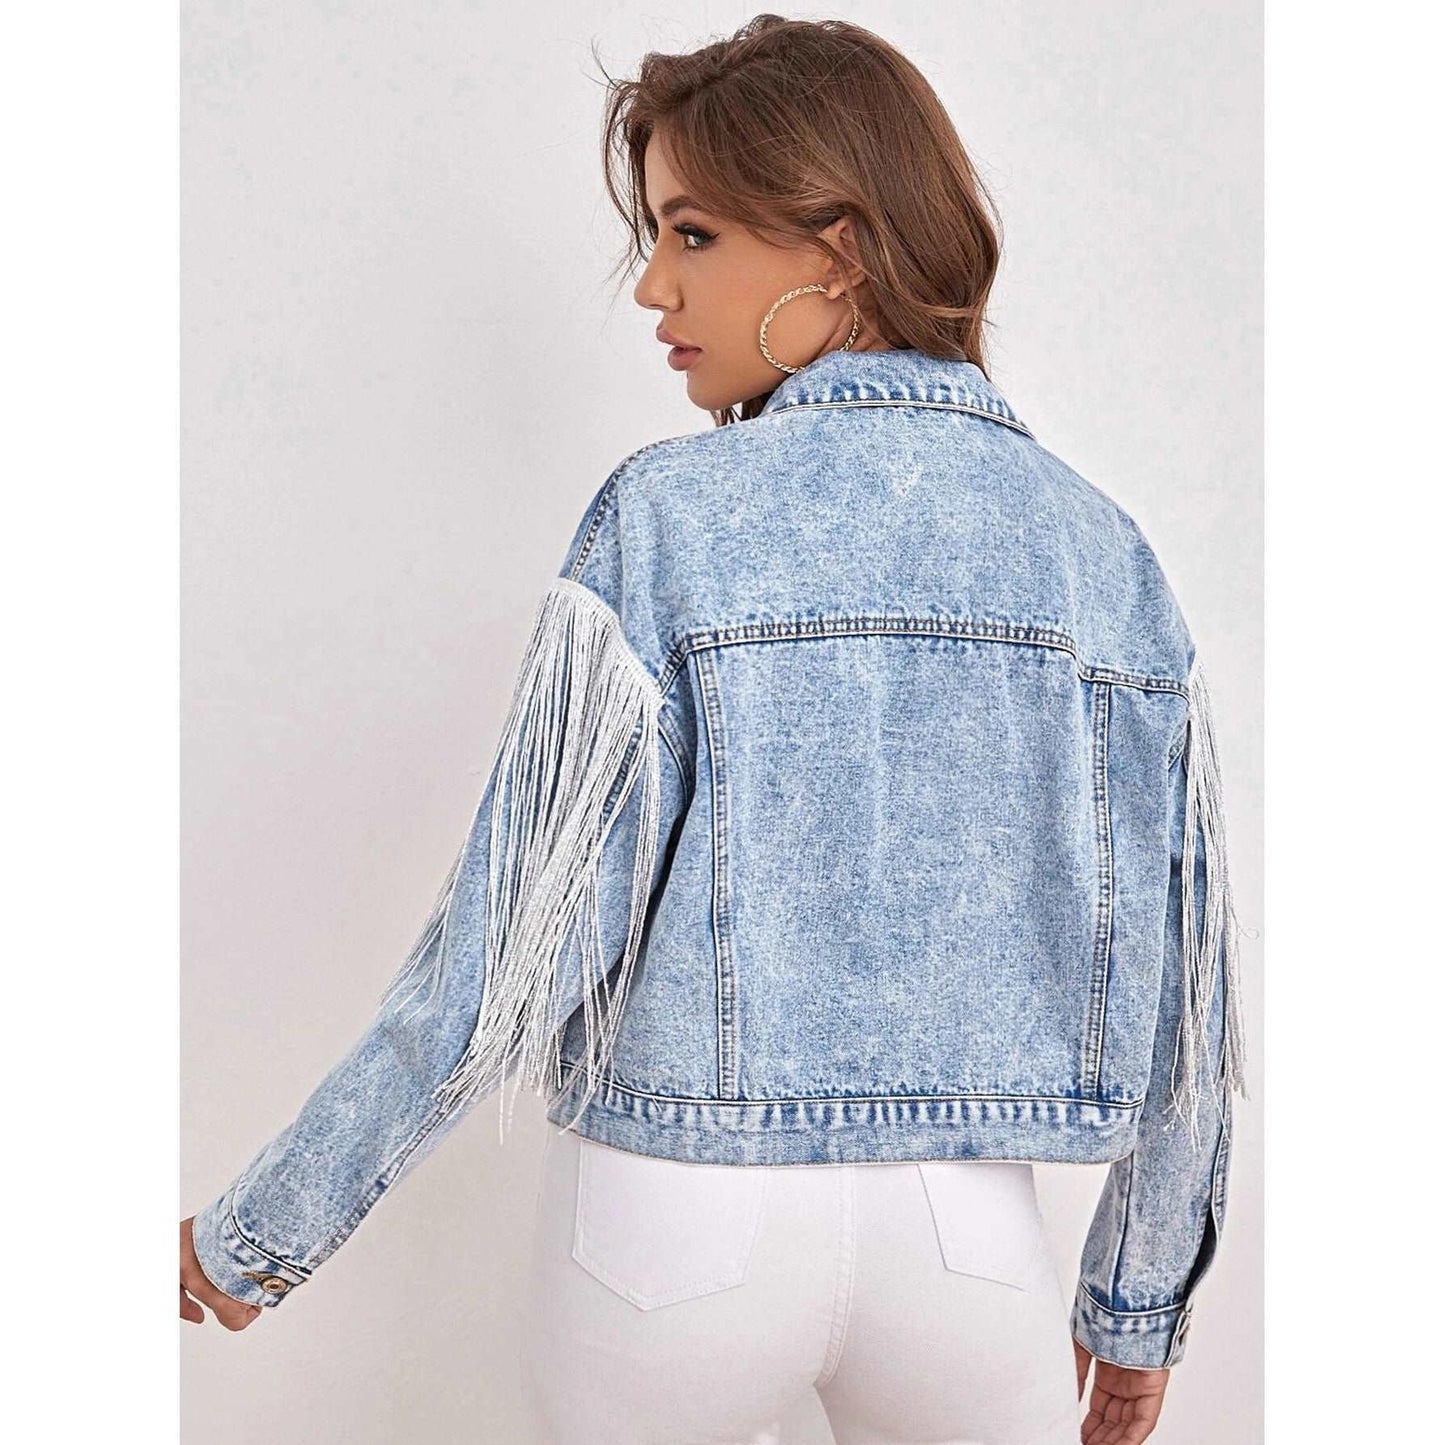 Women's Cowboy Style Denim Jacket with White hanging Strings